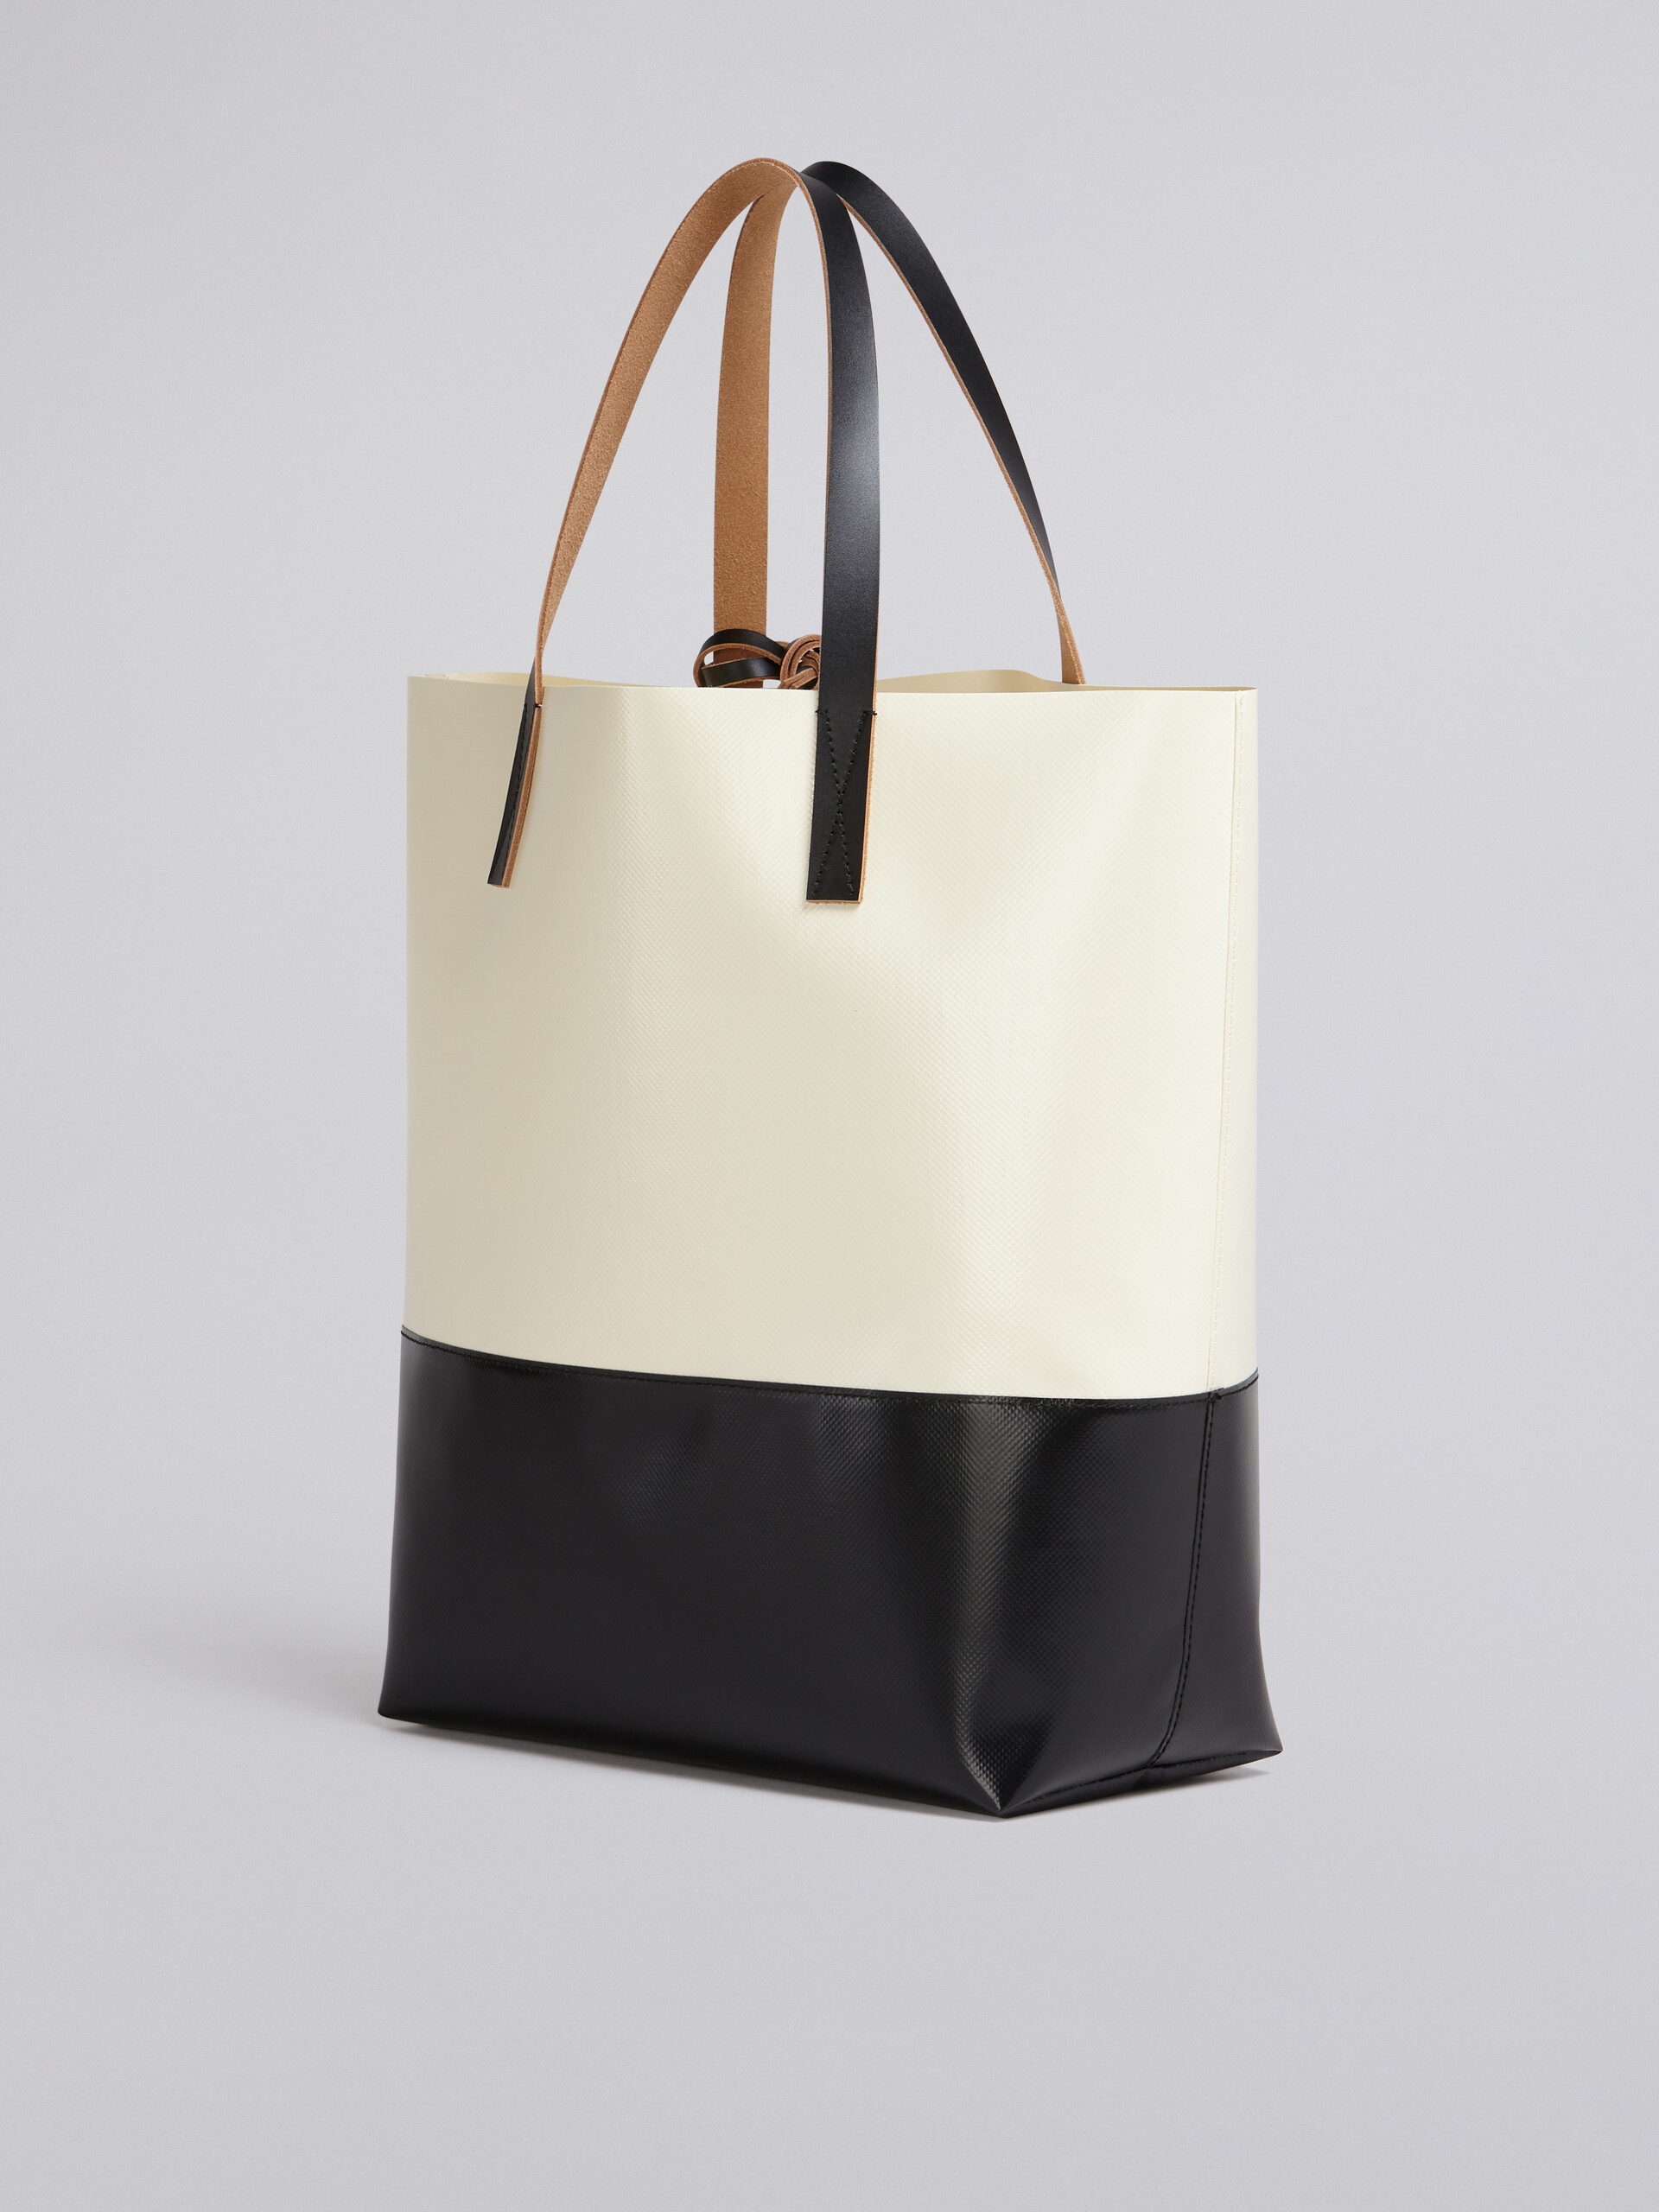 Tribeca shopping bag in white and black - Shopping Bags - Image 3